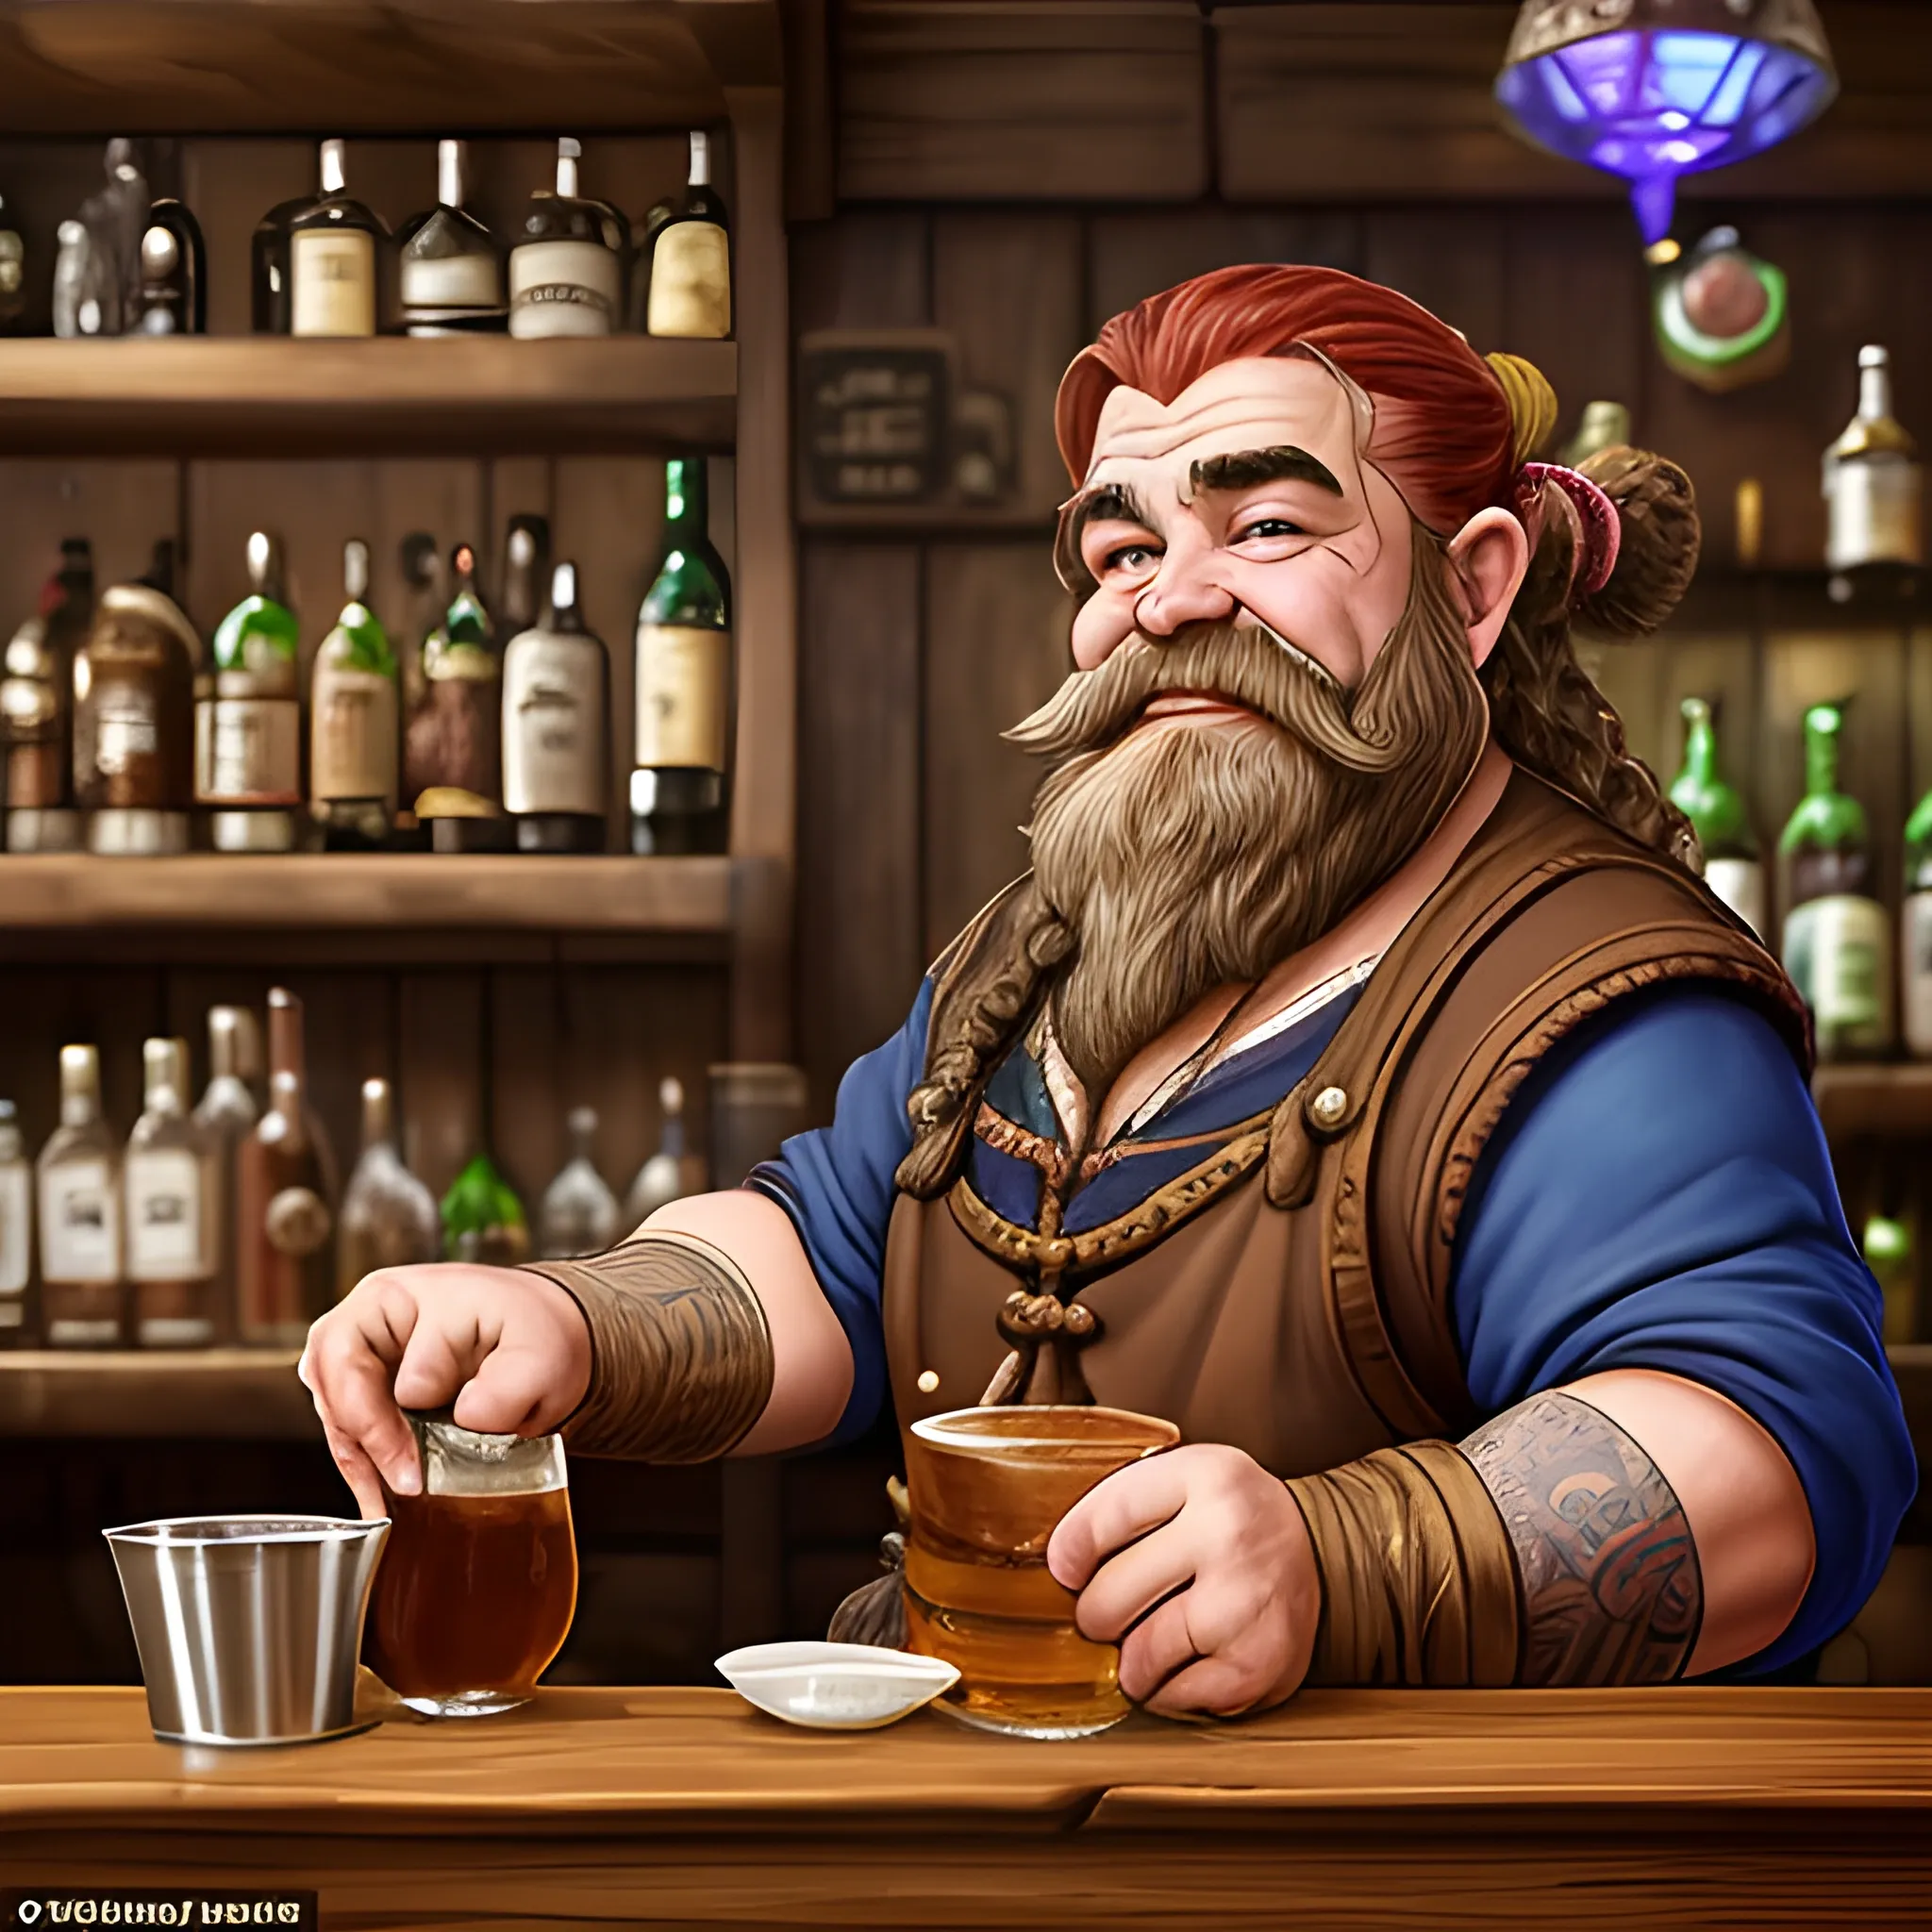 Appearance: The bartender is a stout and robust Dwarf, a natural fit for the role with their love of a good drink and merriment. Standing behind the bar with a barrel chest and muscular arms, they exude an air of confidence and competence. Their thick, braided beard is impeccably groomed, and their fiery red hair matches the gleam in their eyes. Despite their short stature, they carry themselves with pride and authority, ensuring that the tavern runs smoothly.

Features: This Dwarf bartender is an expert in the art of brewing and mixing drinks, boasting an impressive knowledge of beverages from all corners of the realm. They take pride in their craft and are always eager to share their expertise with curious patrons. Their boisterous laughter can be heard throughout the establishment, setting the tone for a lively and convivial atmosphere.

Habitat: This Dwarf bartender can be found in renowned taverns across the land, often in the heart of bustling cities or near mines and trade routes where Dwarves congregate. They may run an alehouse famous for its signature brew or manage an inn that welcomes travelers from near and far. In your DND world, this Dwarf bartender might be part of a close-knit Dwarven community or one of the few Dwarves venturing outside their mountain homes.

Behavior: True to their Dwarven heritage, this bartender is hardworking, reliable, and fiercely loyal to their patrons. They value tradition and history, always eager to regale customers with tales of legendary heroes or the exploits of their ancestors. Their hearty demeanor and ability to hold their liquor make them the perfect drinking companion for those seeking camaraderie and mirth.

Role in the World: In your DND world, this Dwarf bartender embodies the spirit of celebration and unity. They serve as a symbol of the joys of life, bringing people together to share stories and forge new friendships. Adventurers may find solace in their familiar presence, knowing that even in the farthest reaches of the realm, they can always find a friendly face in this Dwarf tavernkeeper.

Encountering a Dwarf bartender in your campaign can be a delightful and memorable experience for players. It provides an opportunity to explore the rich cultural traditions of Dwarves and appreciate the sense of community and kinship they foster. The interactions with this lively bartender can lead to jovial role-playing moments, creating a sense of camaraderie among the players and their characters.

The presence of a Dwarf bartender in your campaign world adds depth and authenticity to the portrayal of Dwarven culture. It showcases the Dwarves' love of craftsmanship, storytelling, and hearty revelry, painting a vivid picture of a race known for their lively spirits and strong bonds. This NPC can become a cherished and endearing character in your DND campaign, making the tavern they run a beloved location where players can find respite and warmth amidst the adventures that lie ahead.